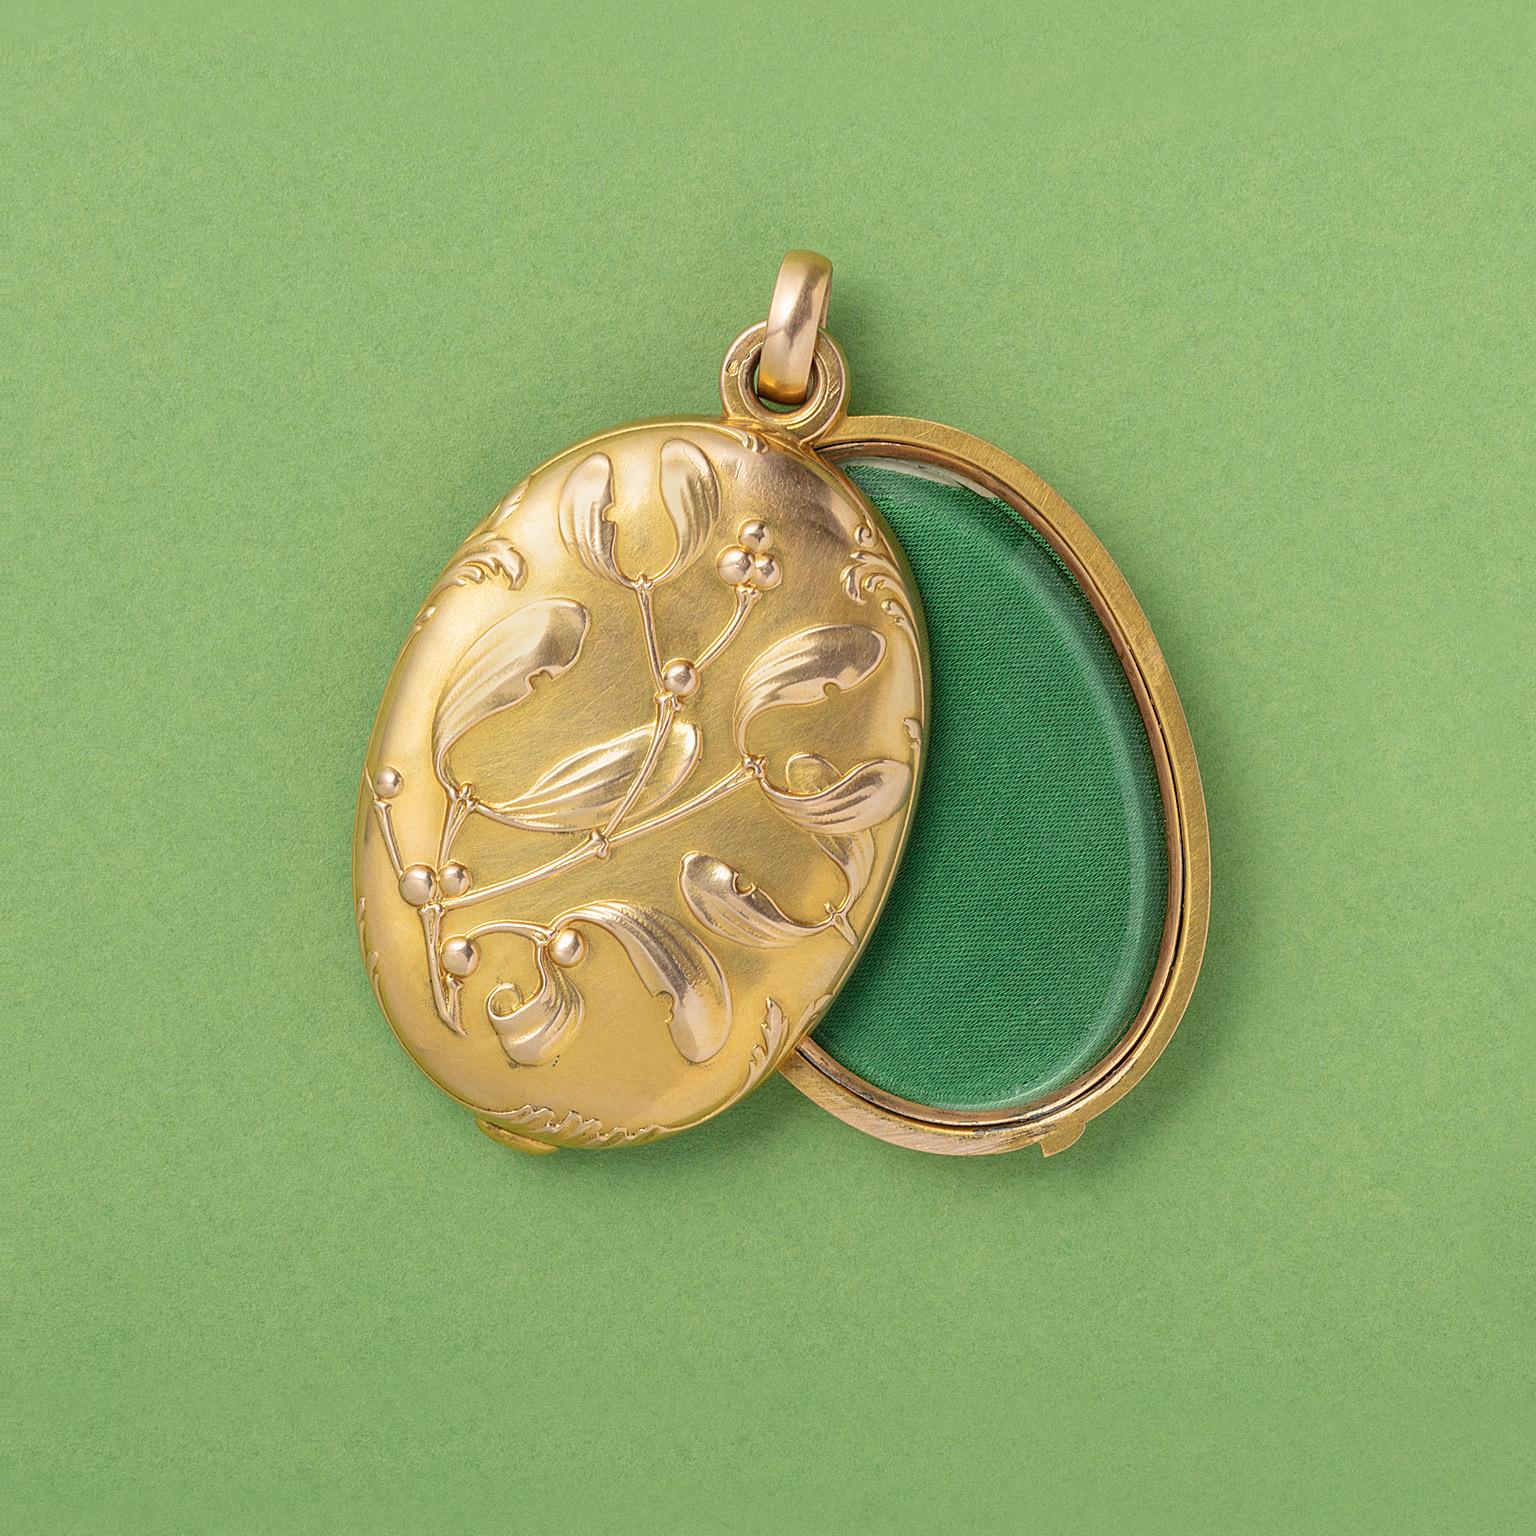 A large, oval, 18 carat yellow gold locket with gold missletoe on front and back 'en relief'. The locket opens sideways and on the inside a mirror on one side and a glassed compartment on the other. Mistletoe symbolises constancy and stands for a